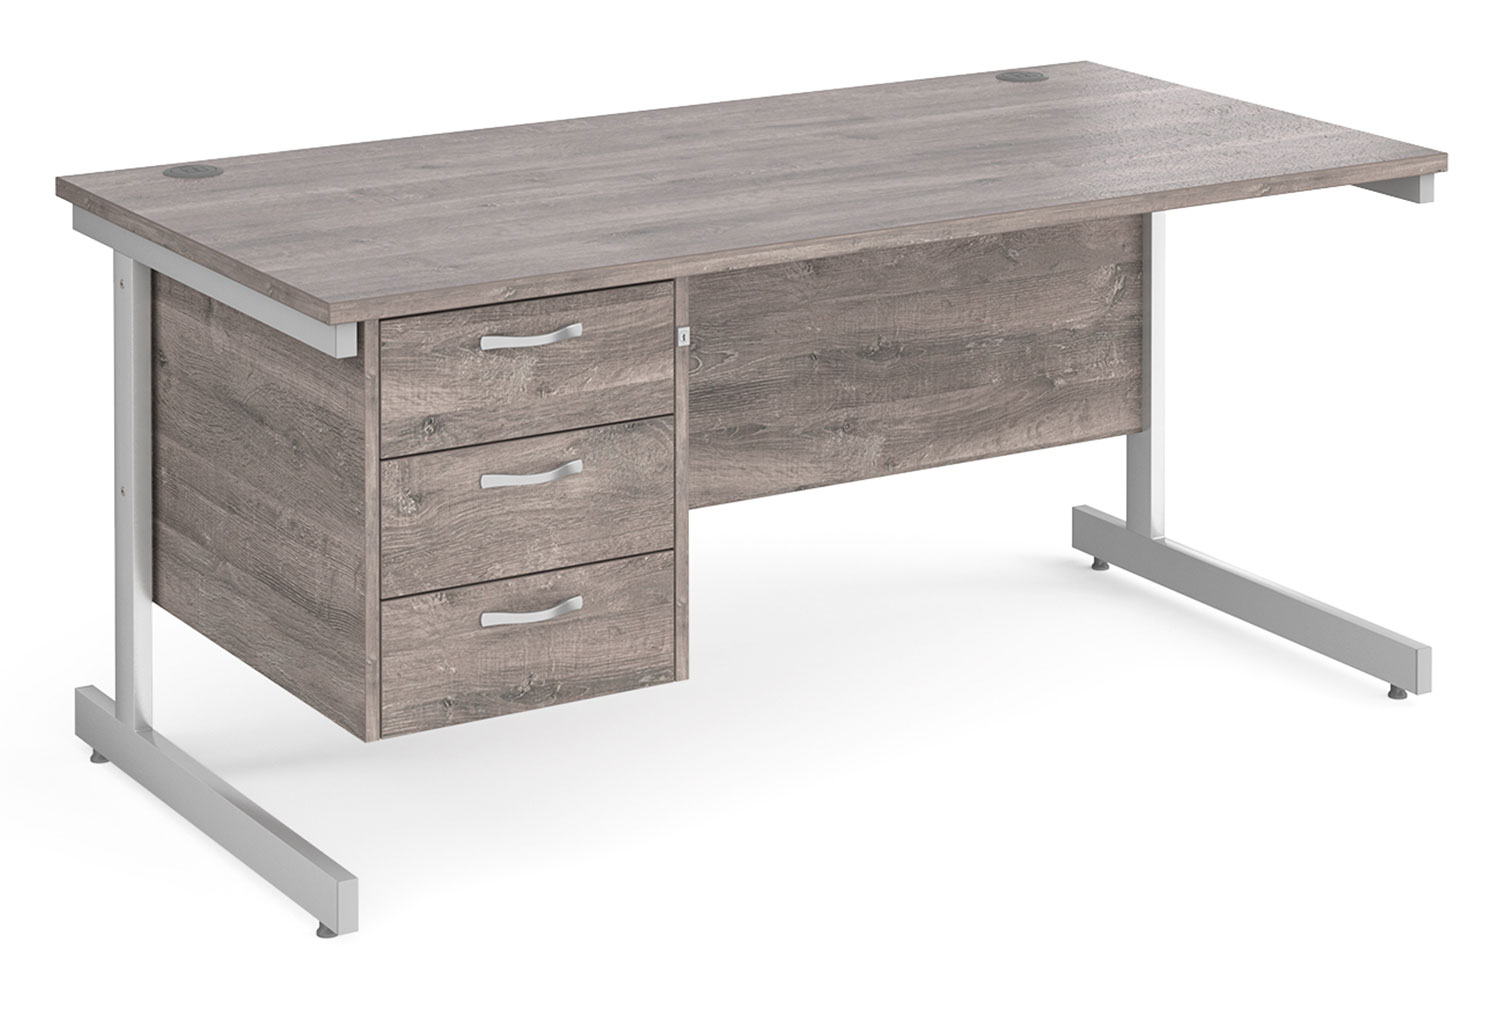 Tully I Rectangular Office Desk 3 Drawers, 160wx80dx73h (cm), Grey Oak, Express Delivery